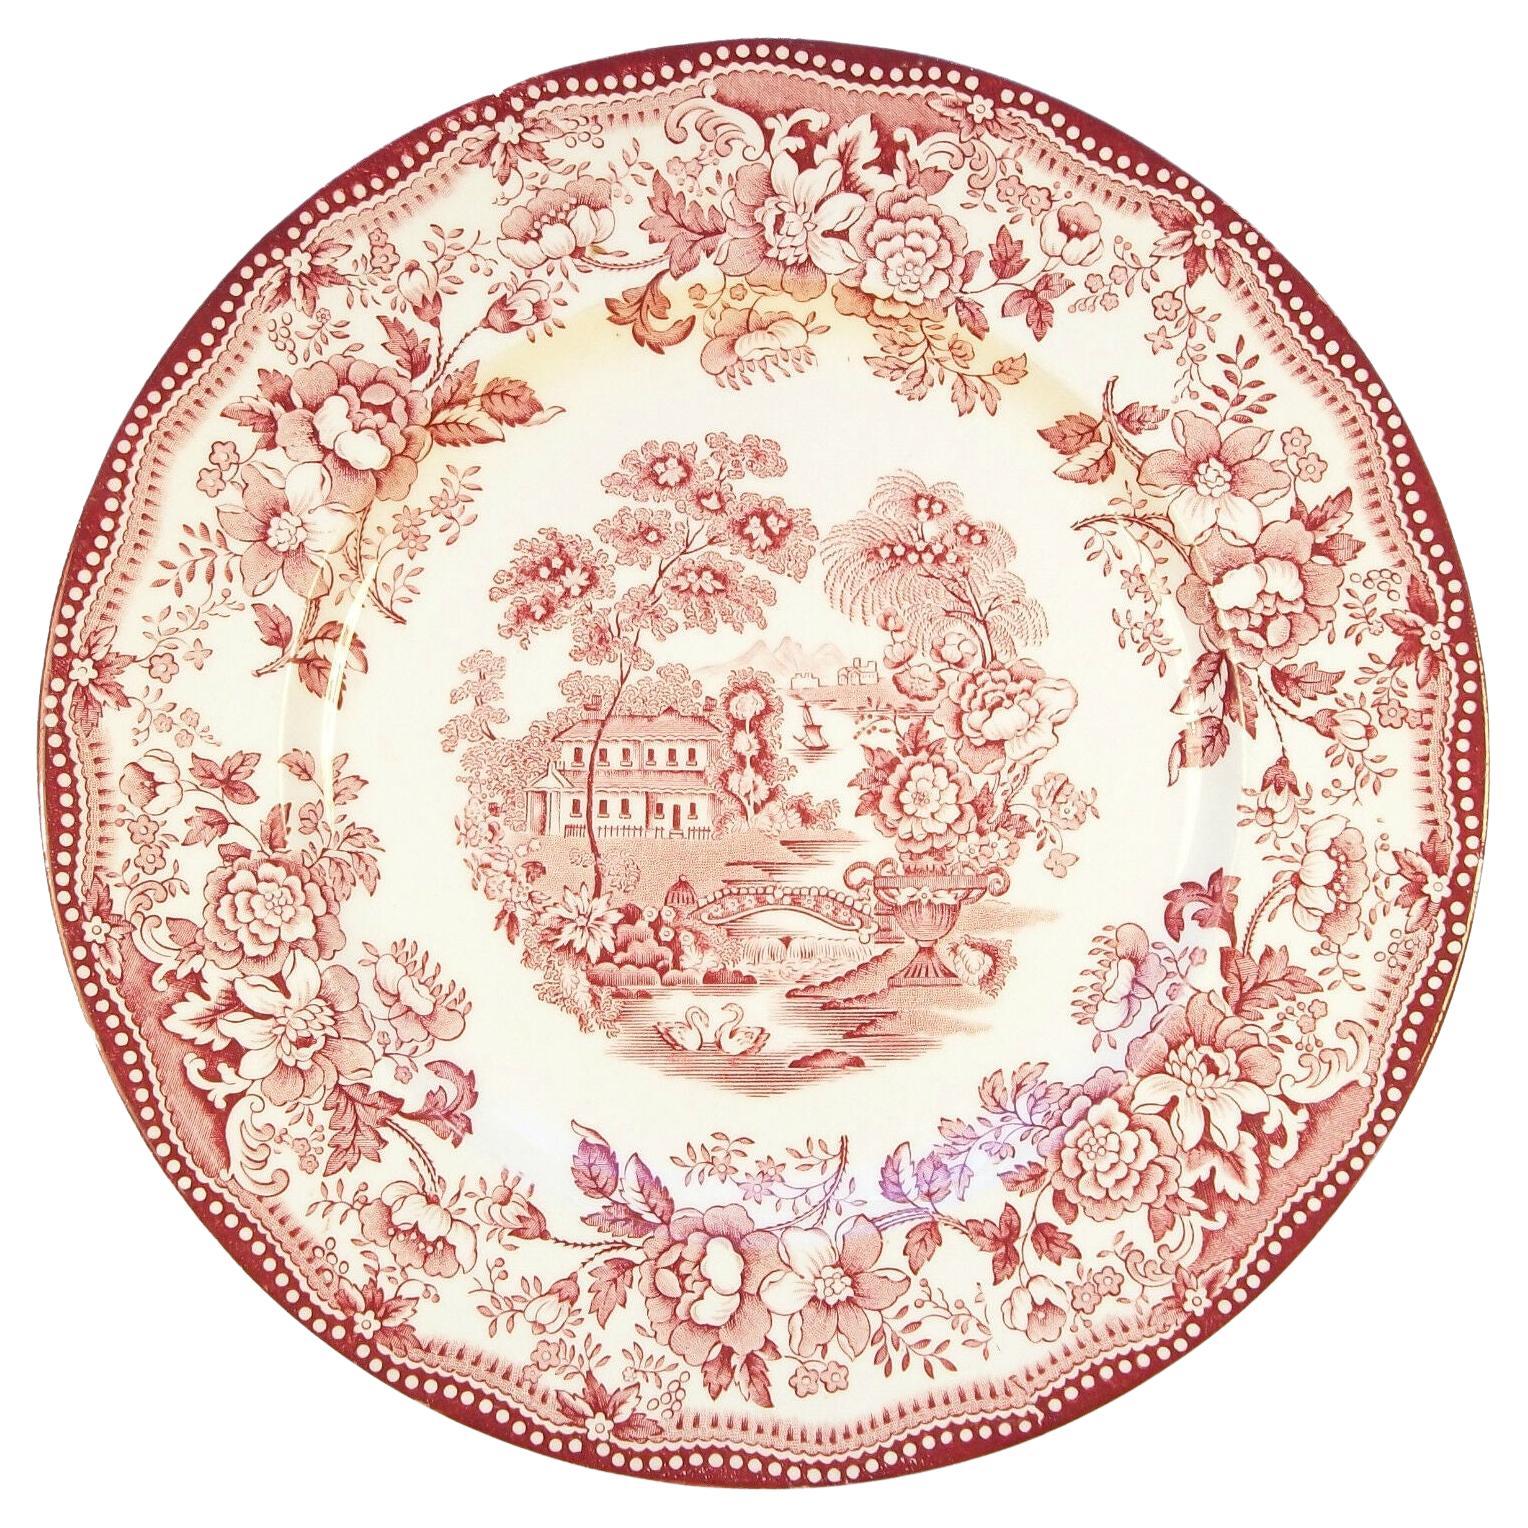 ROYAL STAFFORDSHIRE - Clarice Cliff - 'Tonquin' - Dinner Plate - Early 20th C. For Sale